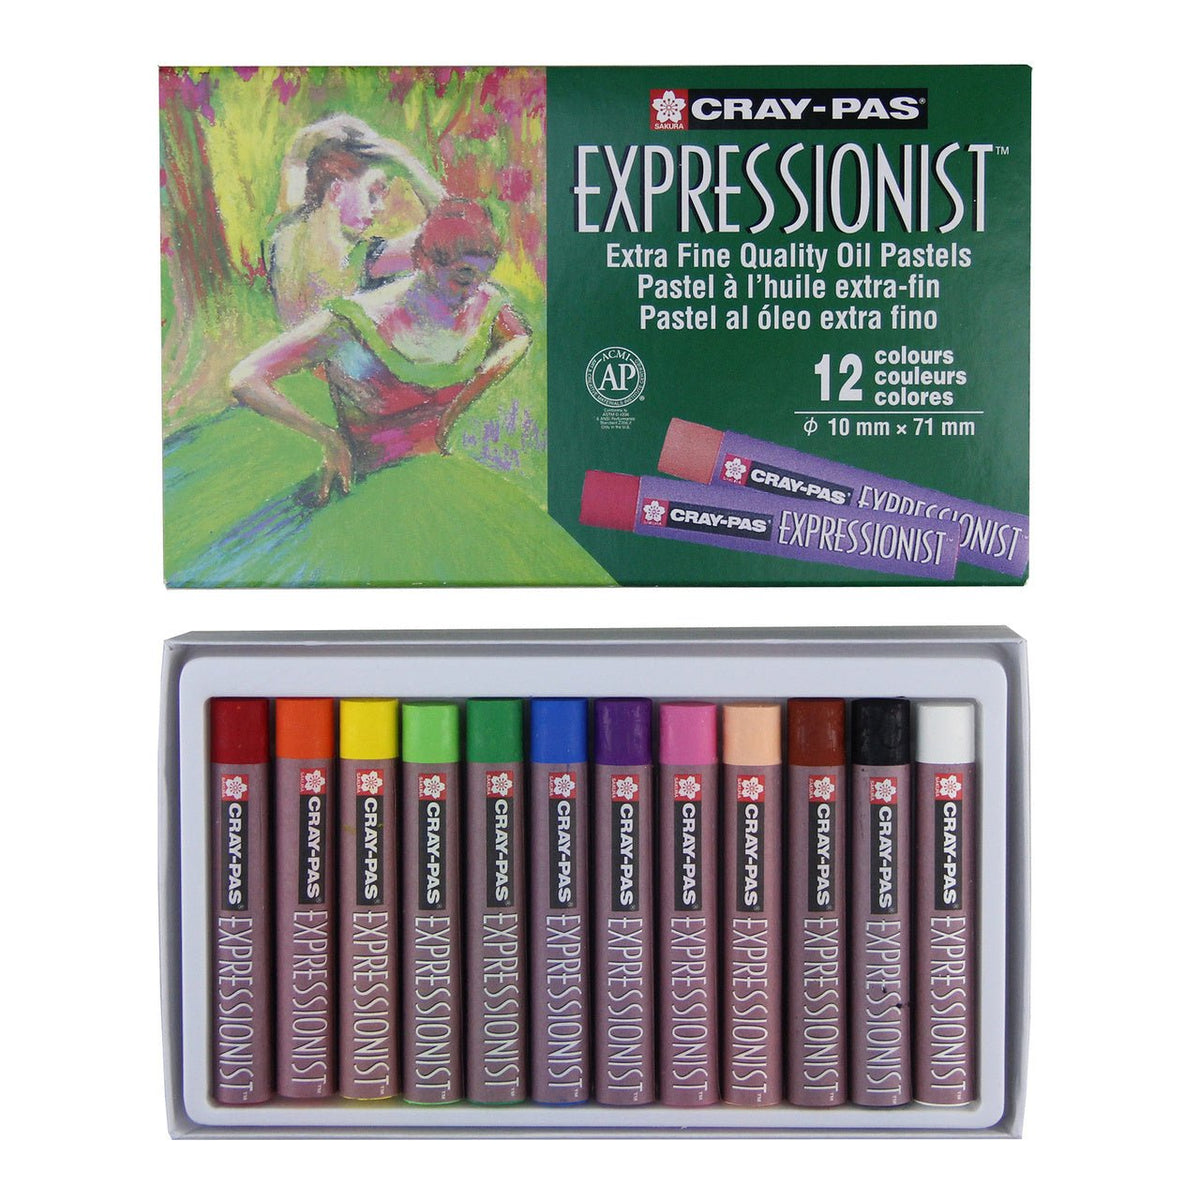 Cray-Pas Expressionist Oil Pastels set of 12 - merriartist.com